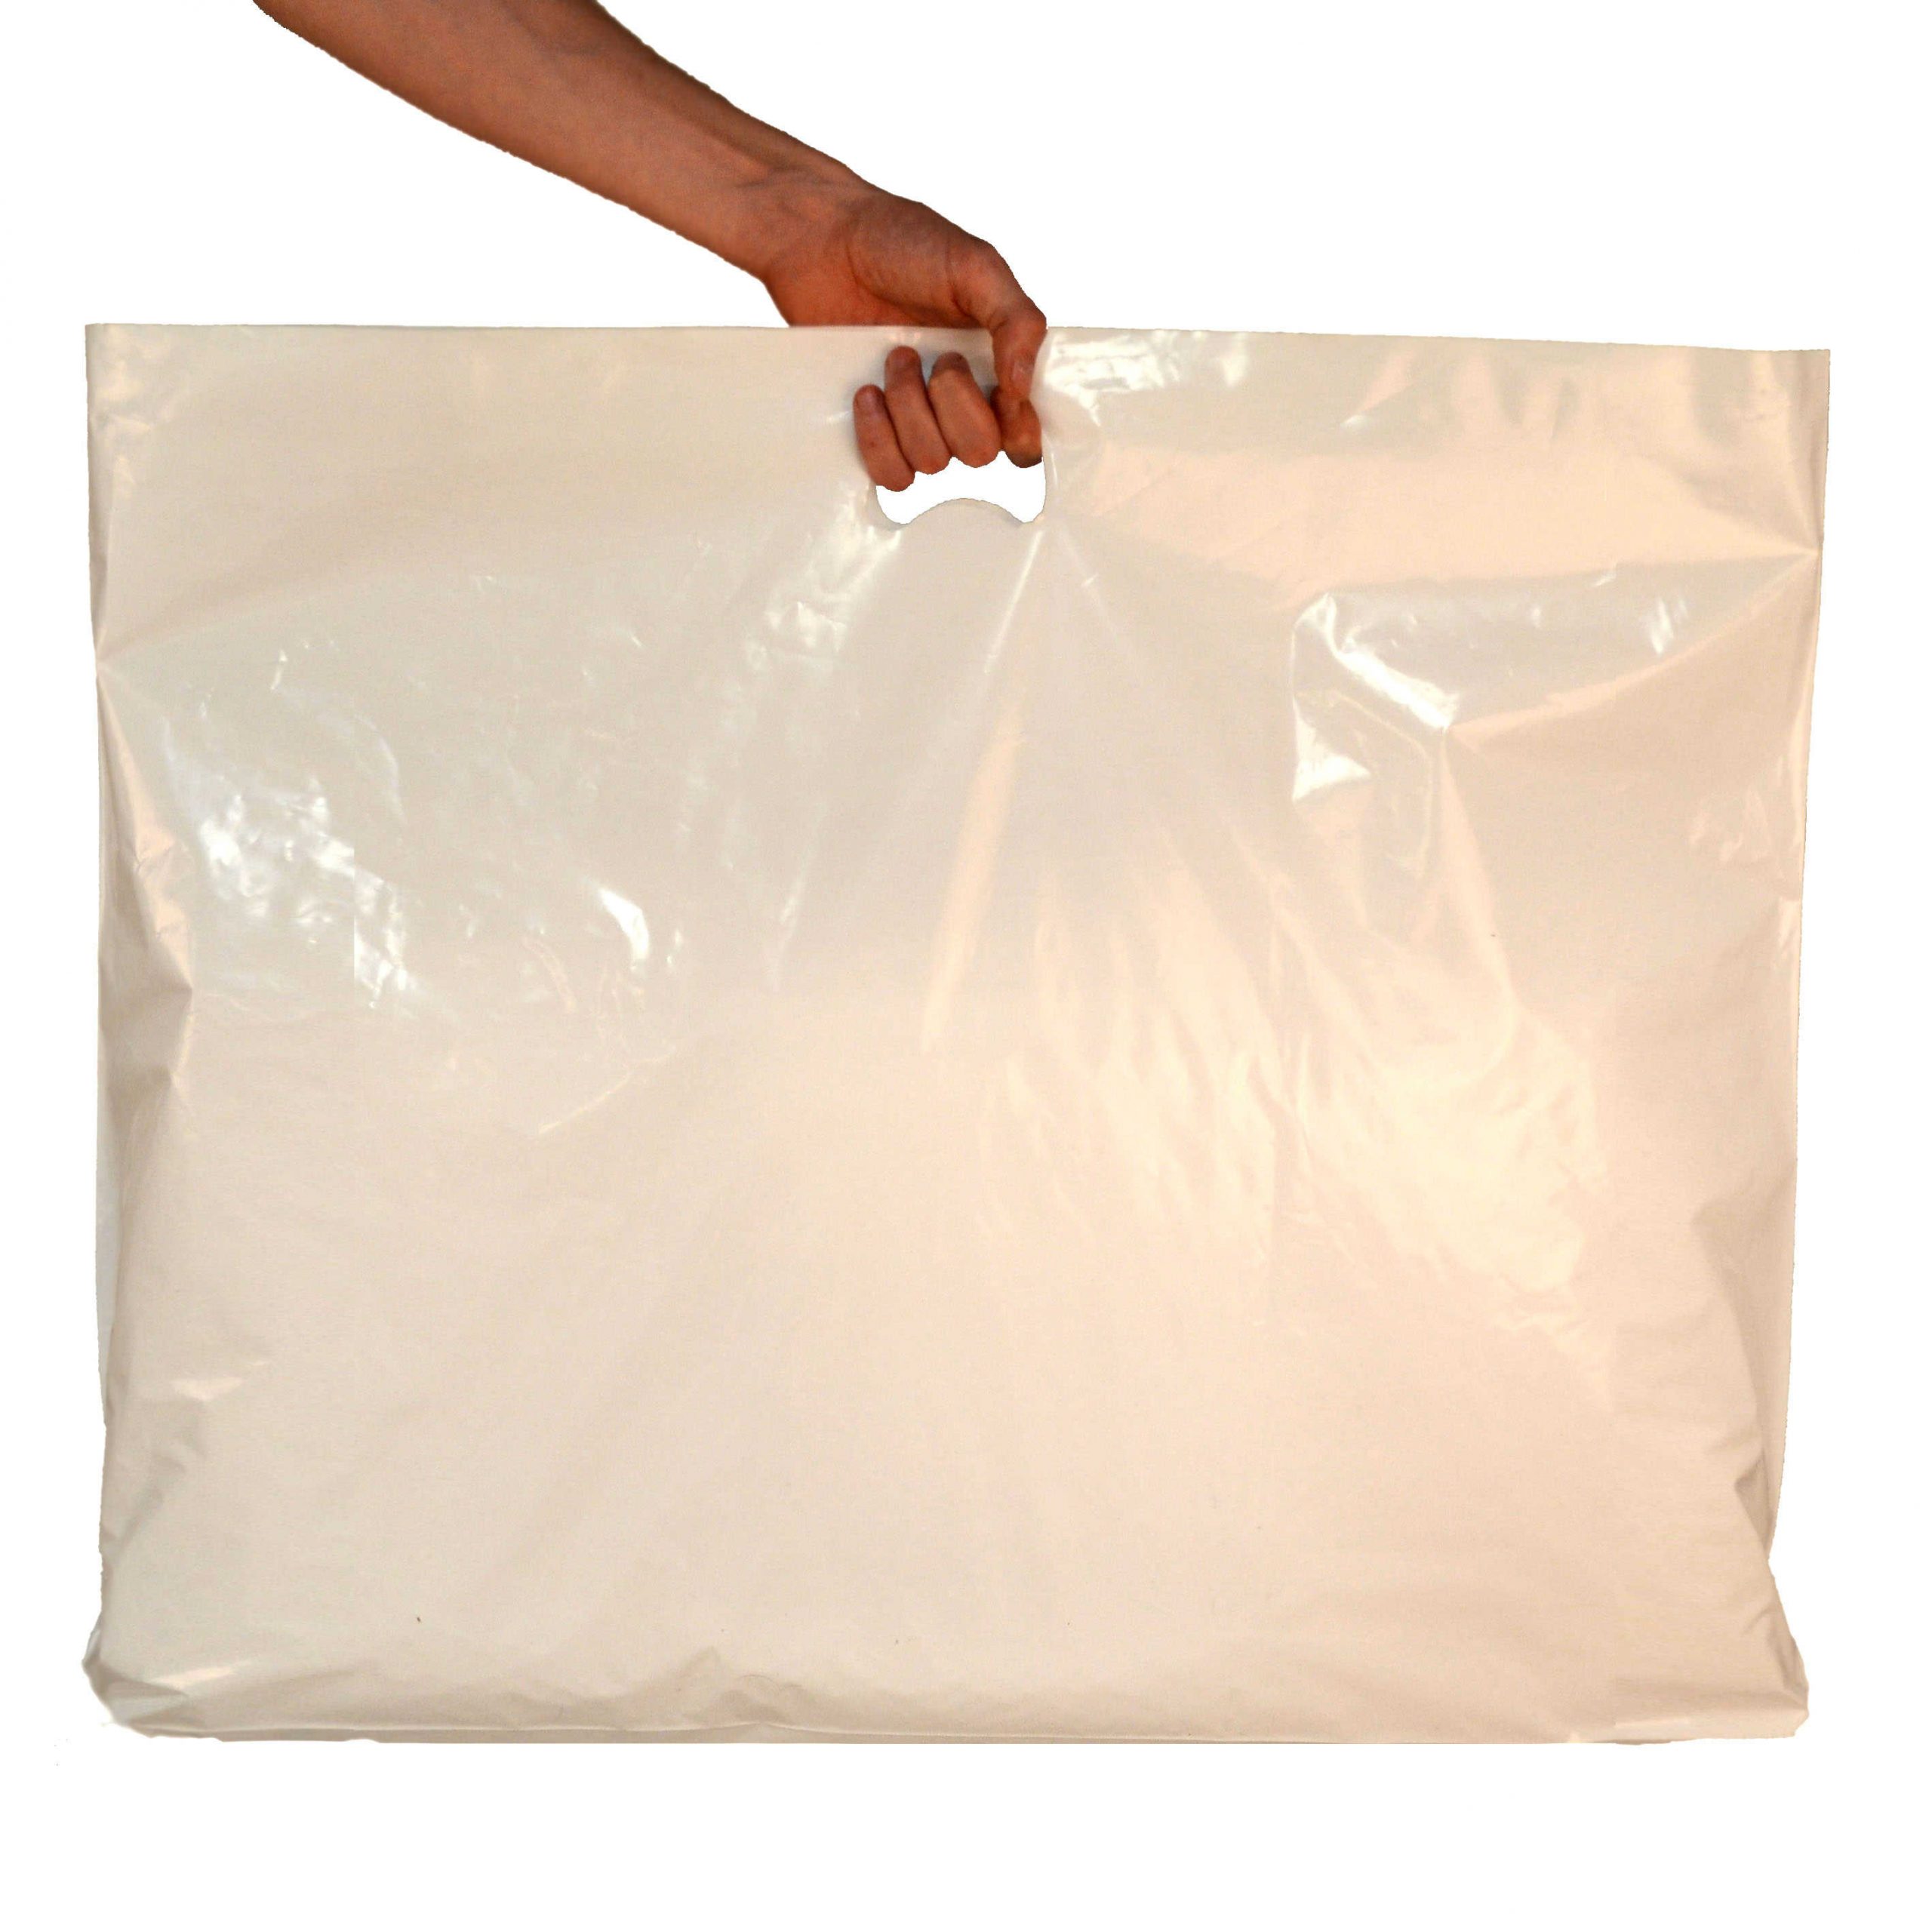 Extra-large plastic carrier bags